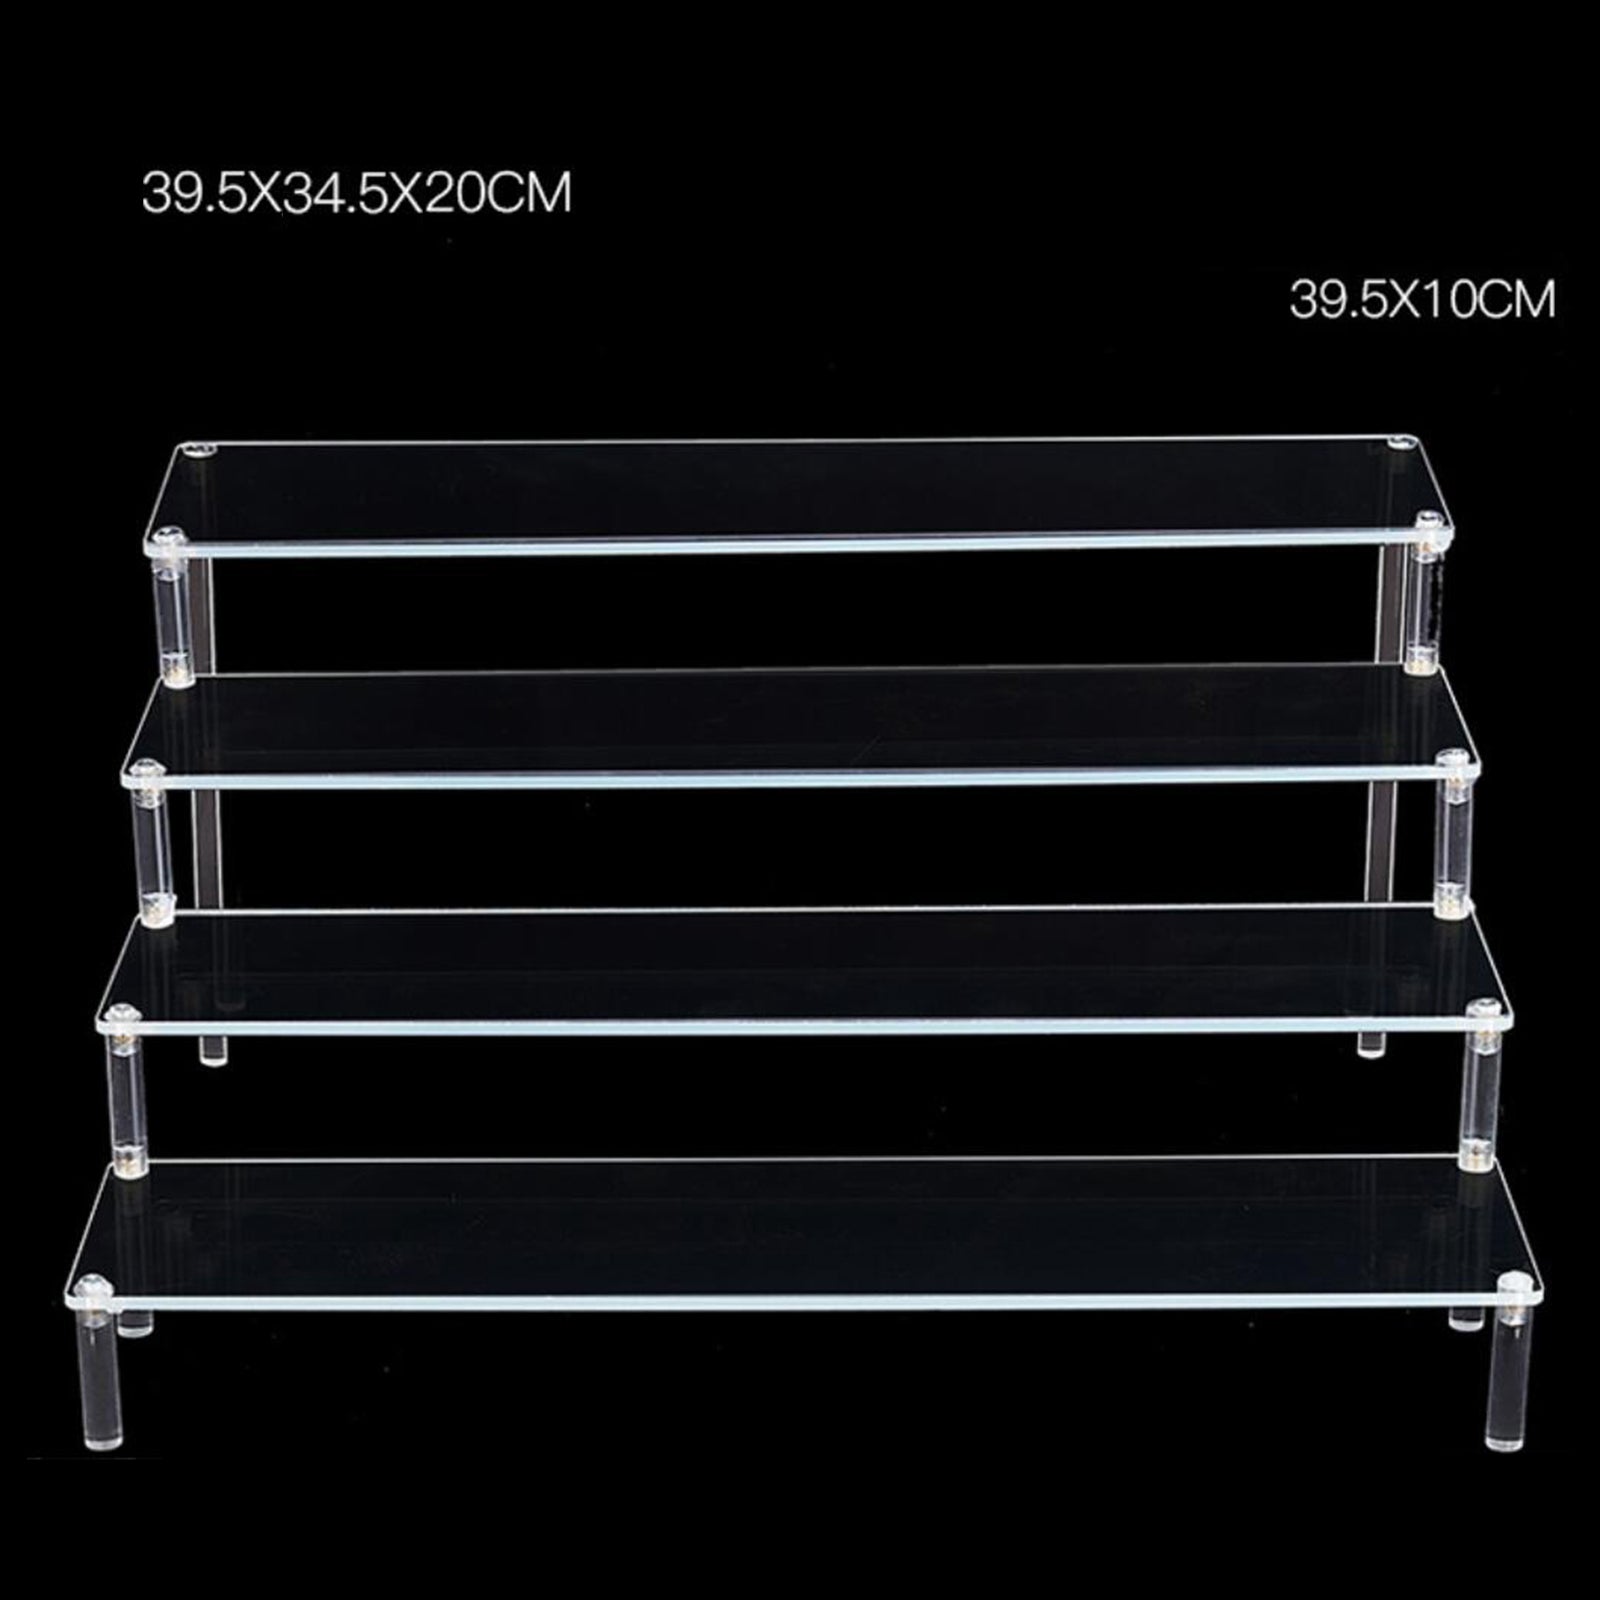 Clear Acrylic Display Riser Stand Perfume Cosmetics Holder for Decoration 39.5x34.5x20cm